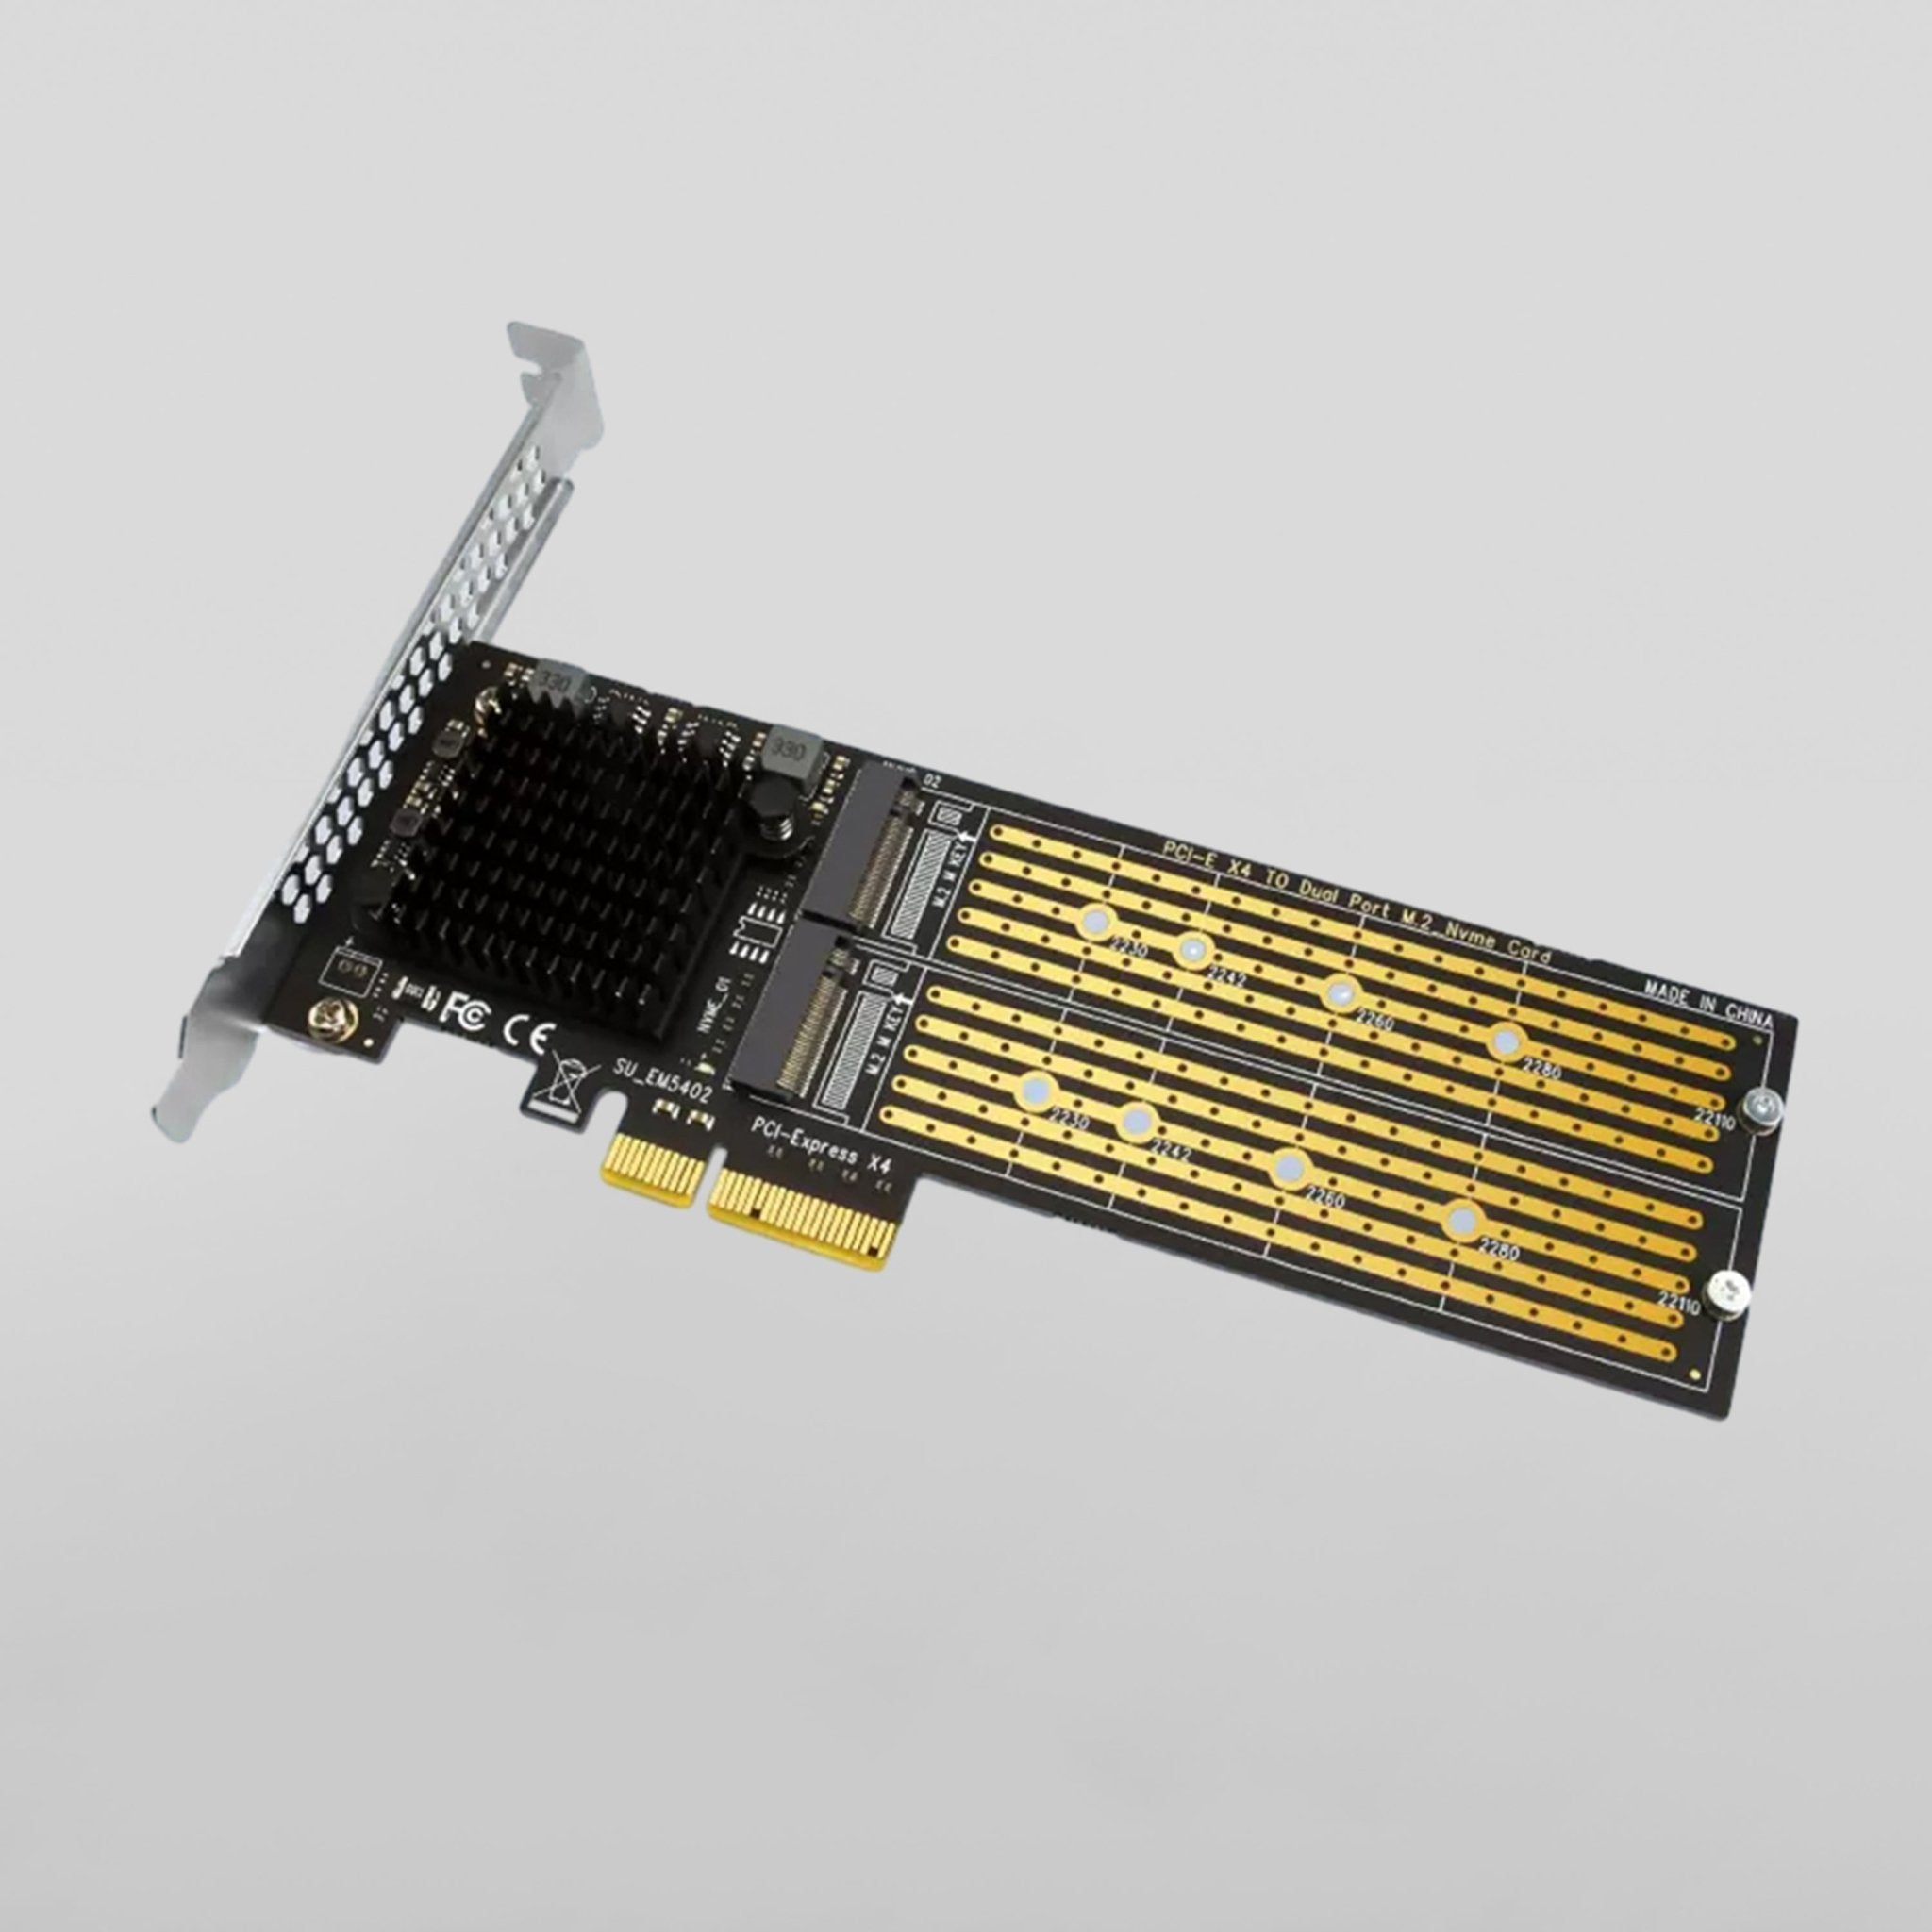 PCIe 3.0 x16 to Dual NVMe M.2 SSD Adapter Card (Pre-order) - Zima Store Online